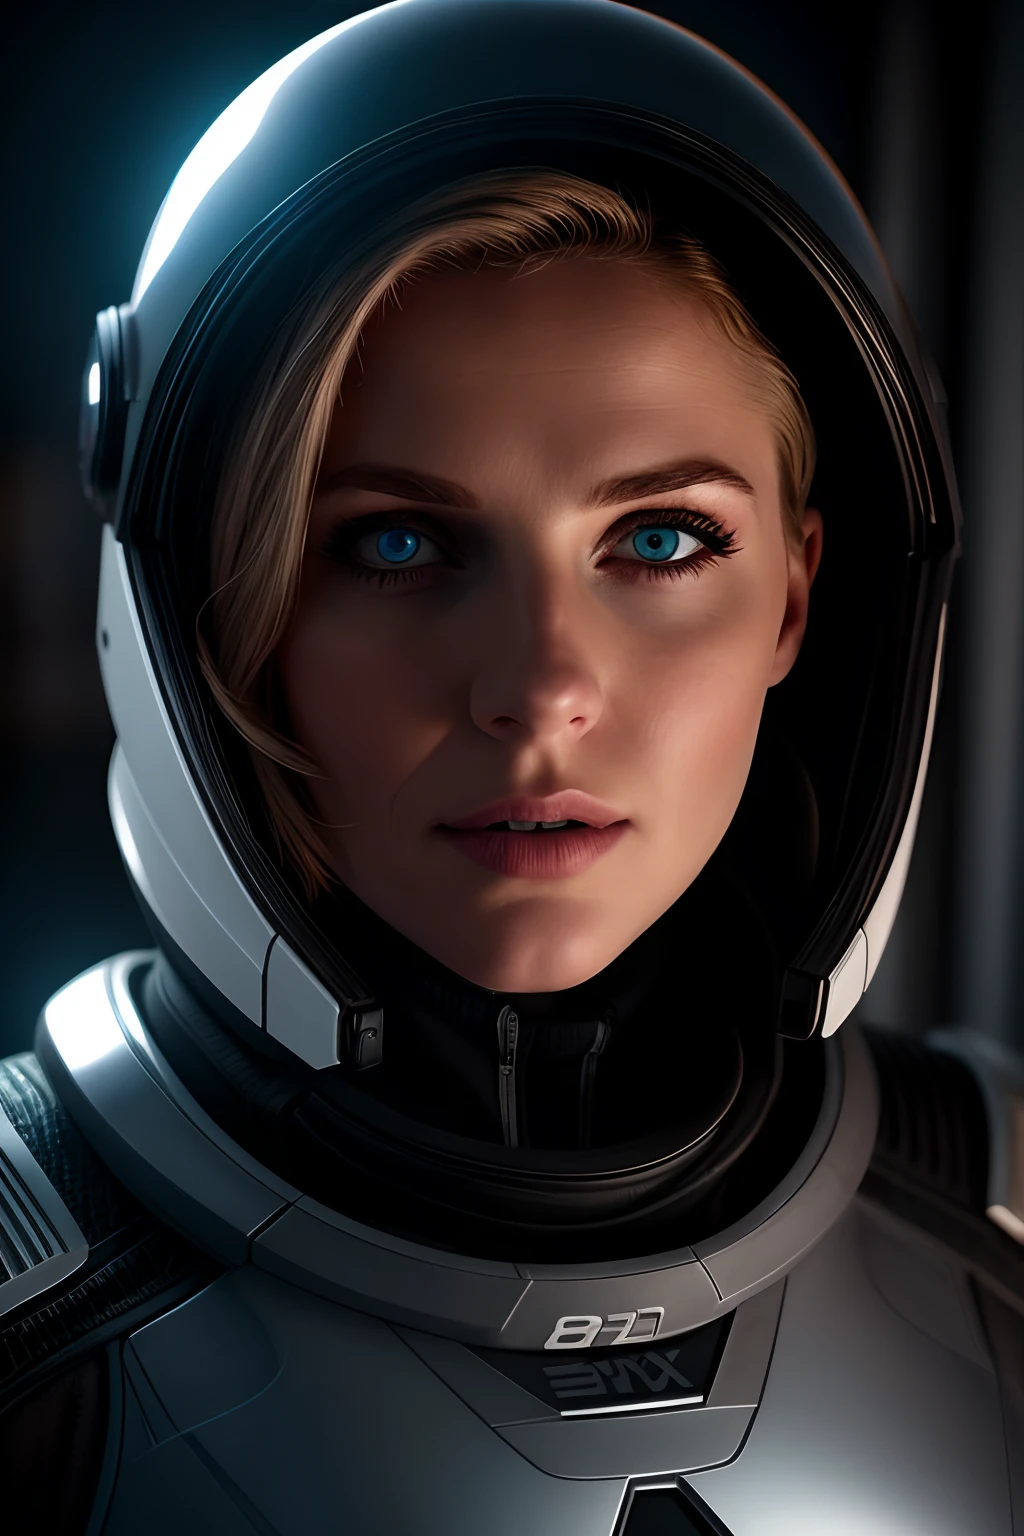 RAW photo, award-winning photo a curvy sexy 21 yo Russian woman with short blond hair in a silver flight suit with red lights a Space Force logo on chest, large chest, DD chest, beautiful blue eyes, asymmetric face, standing in front of a window on a space ship, 80mm, bokeh, mass effect, close up black, Broken Glass effect, no background, stunning, something that even doesn't exist, mythical being, energy, molecular, textures, iridescent and luminescent scales, breathtaking beauty, pure perfection, divine presence, unforgettable, impressive, breathtaking beauty, Volumetric light, auras, rays, vivid colors reflects 80mm, bokeh, mass effect, close up, battle-worn, a fiery desert landscape, dust storms, a blazing sun, intense color, (high detailed skin:1.2), 8k uhd, dslr, soft lighting, high quality, film grain, Fujifilm XT3 natural textures 8k oil paining masterpiece canon eos r4s 50